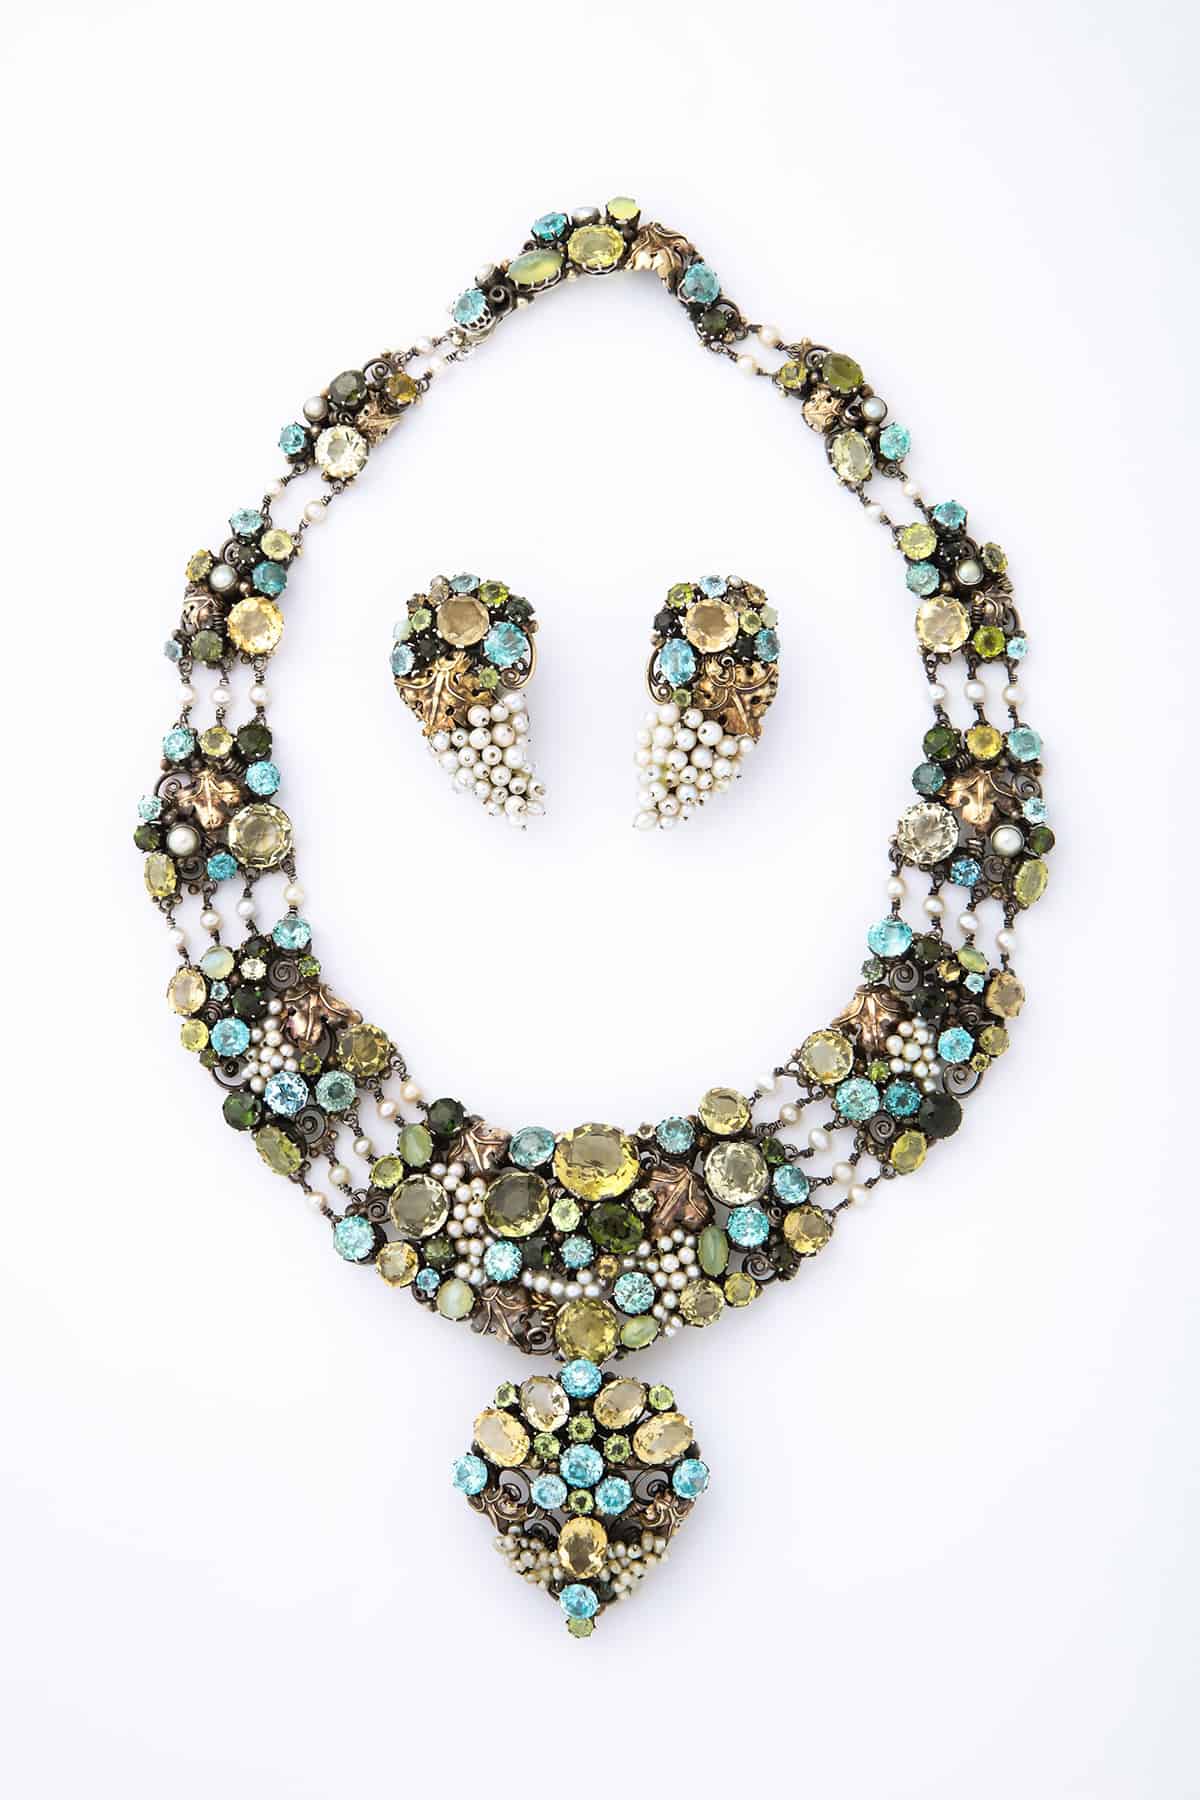 Necklace and earrings by Dorrie Nossiter 1930 at A La Vielle Russie